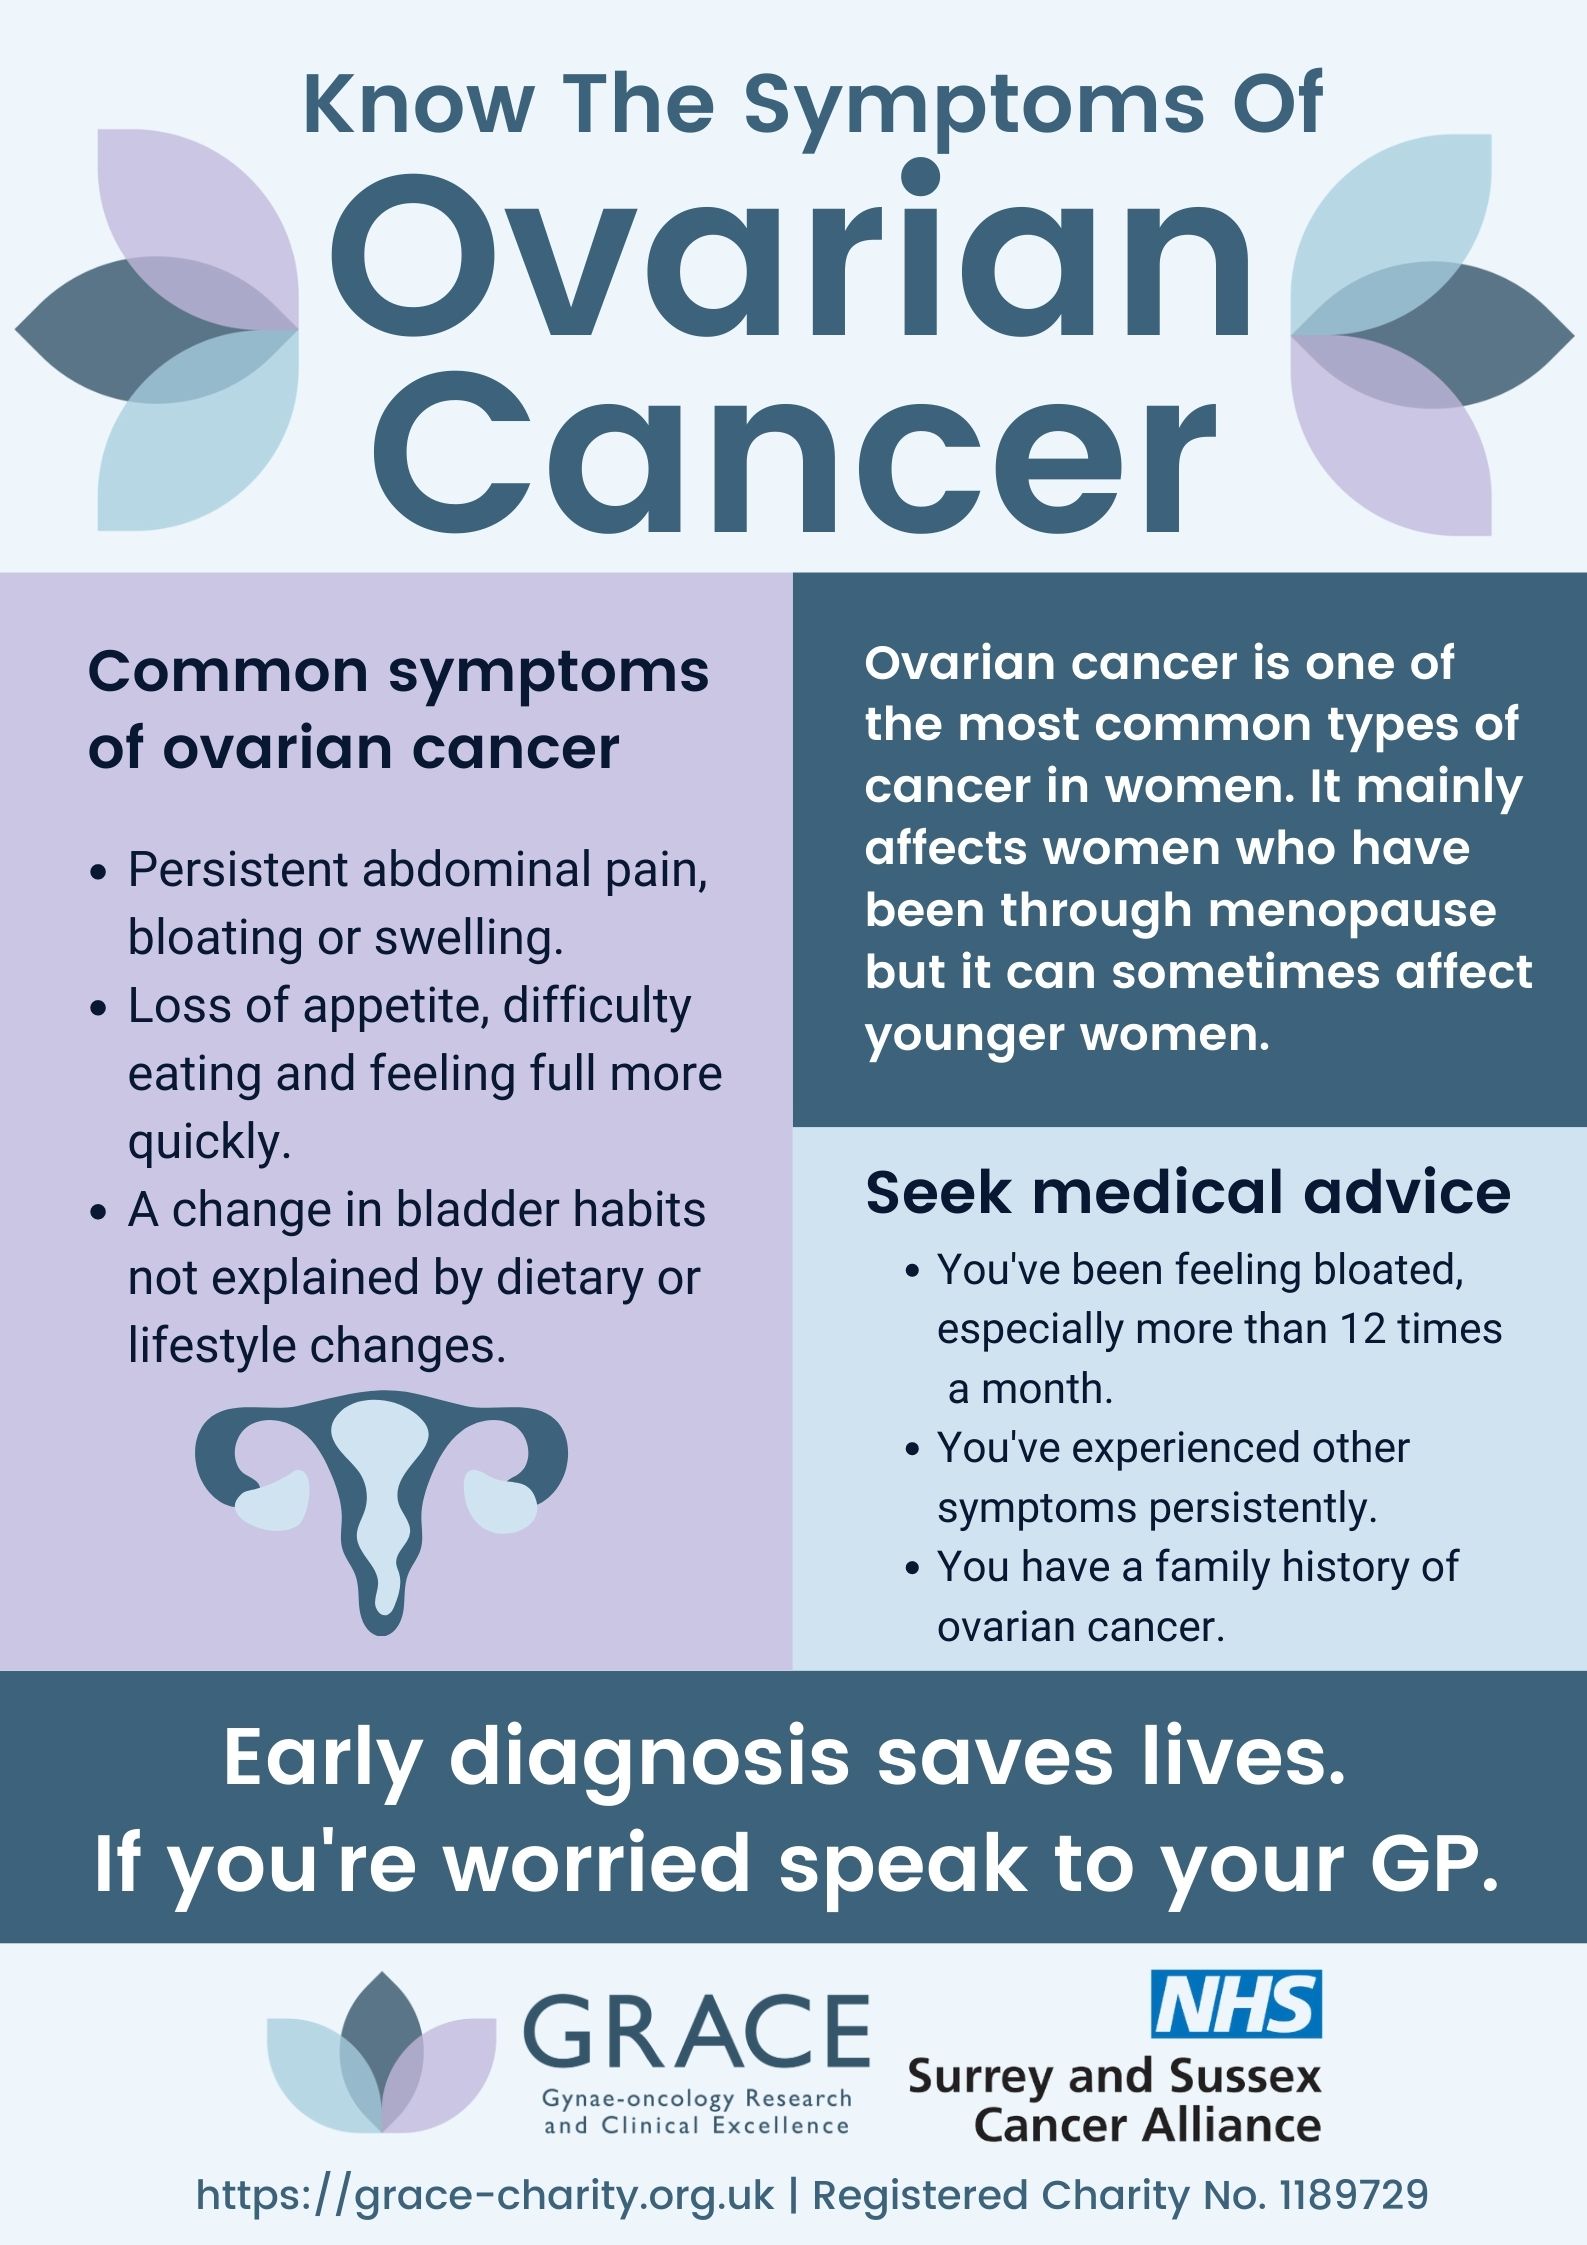 Know the symptoms of Ovarian Cancer: Persistent abdominal pain, bloating or swelling; loss of appetite, difficulty eating and feeling full more quickly; a change in bladder habits not explained by dietary or lifestyle changes. 